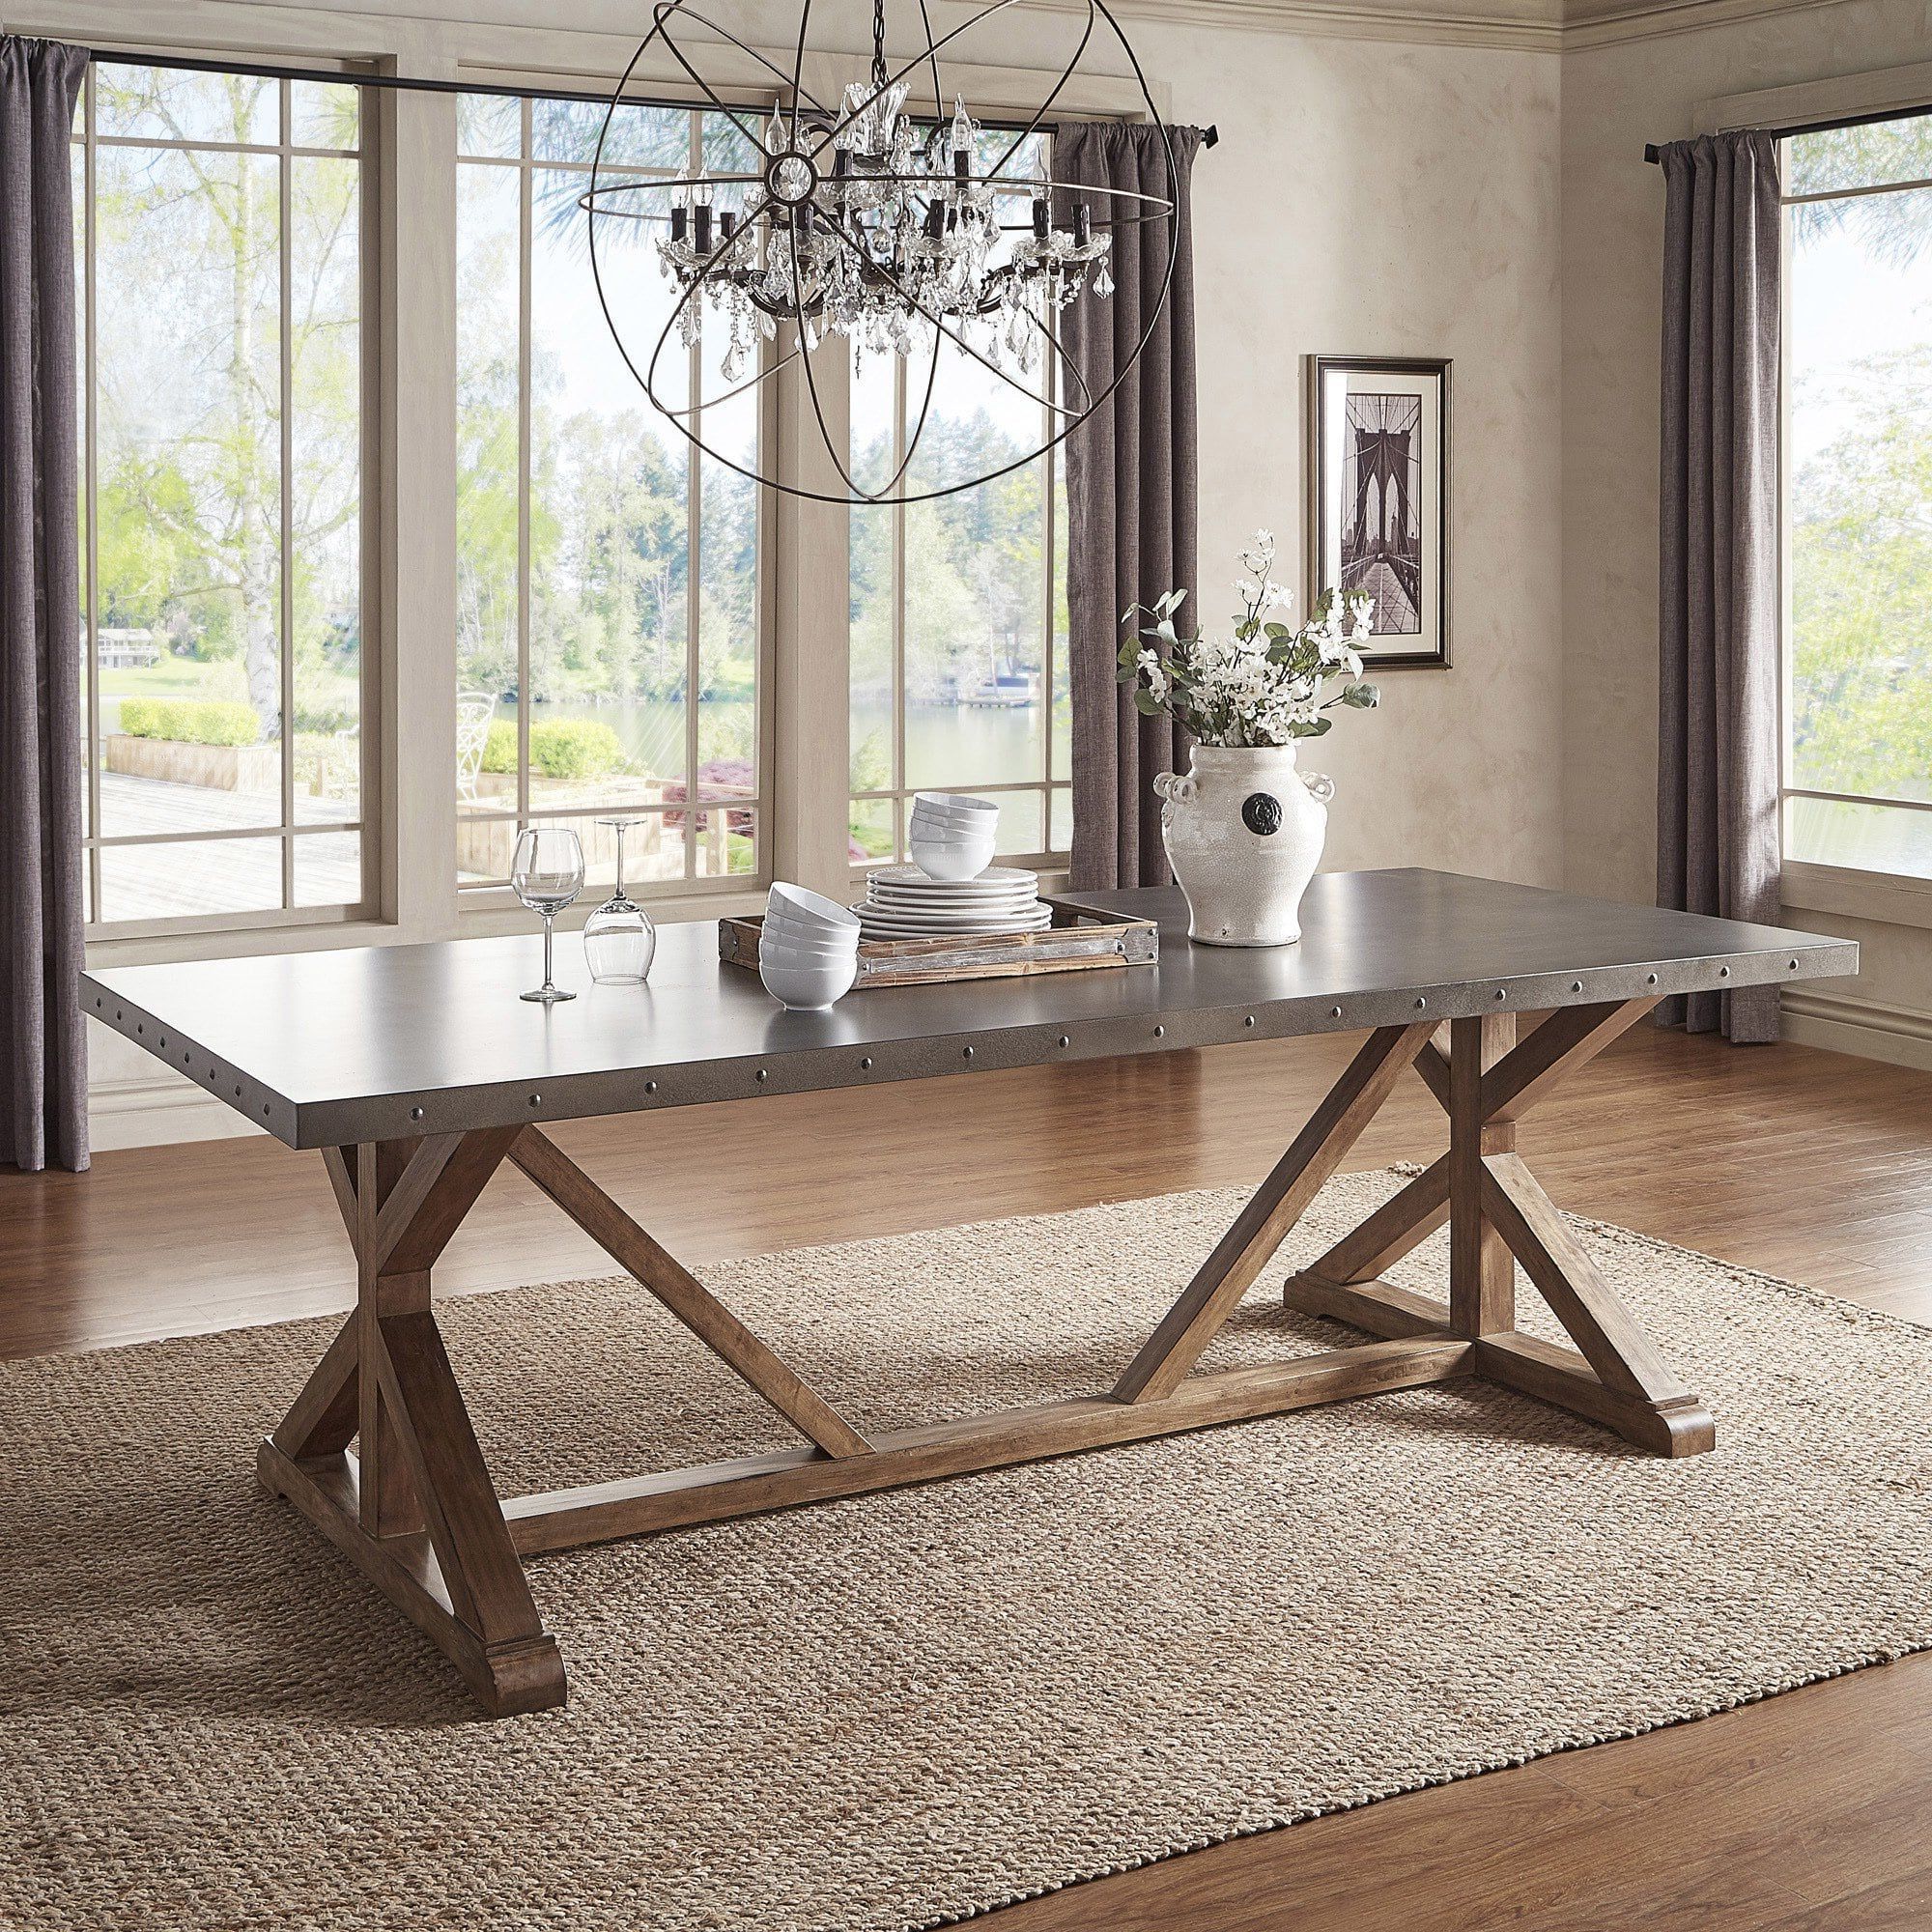 Well Known Rhiannon Poplar Solid Wood Dining Tables With Regard To Albee Rectangular Stainless Steel Top Dining Table With (View 6 of 20)